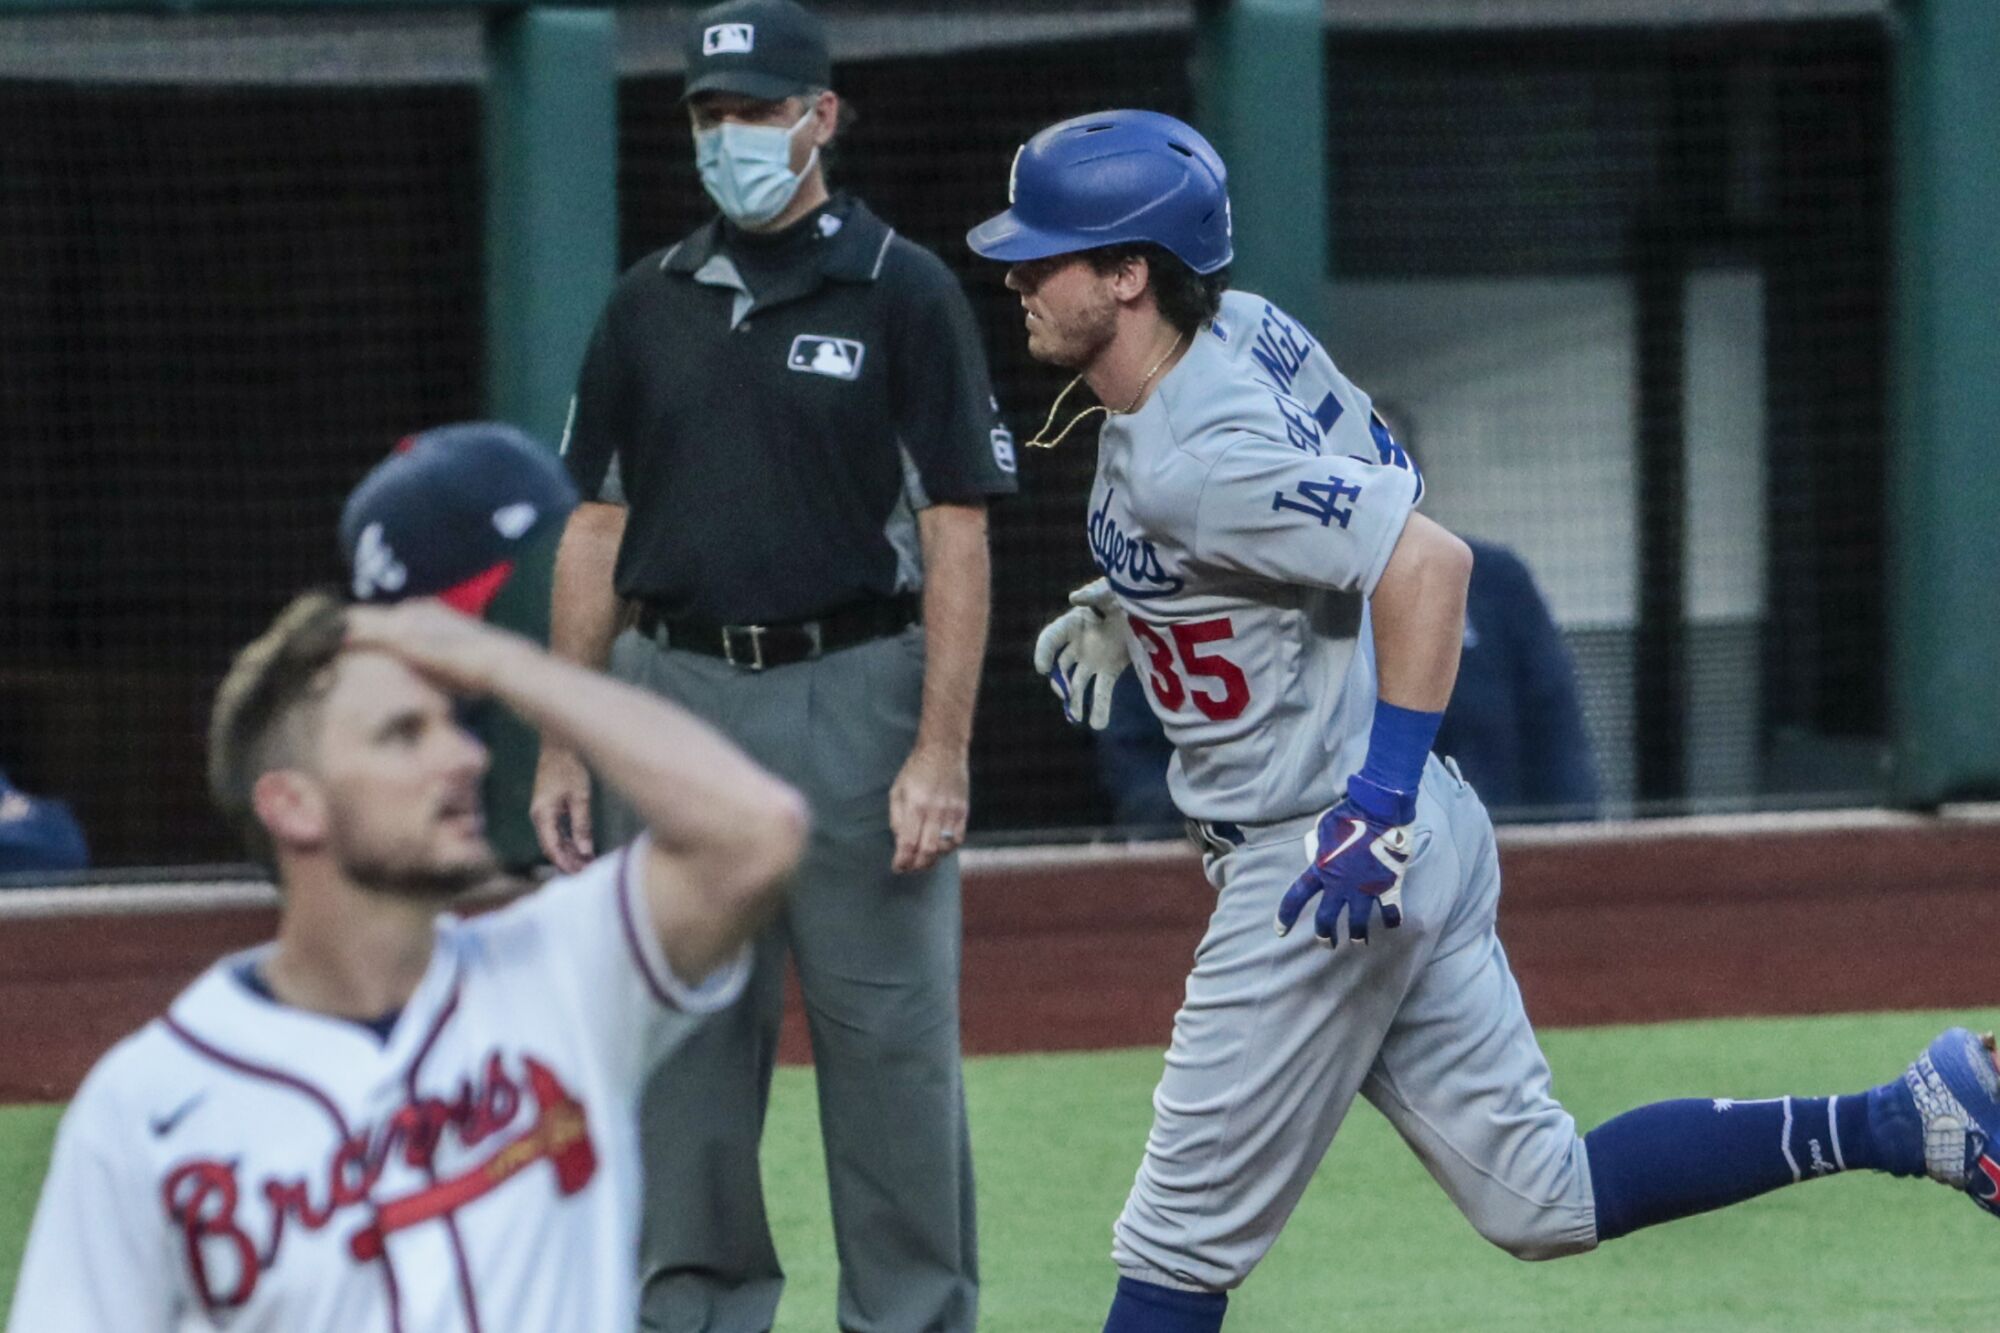 Dodgers center fielder Cody Bellinger circles the bases after hitting a home run off Braves relief pitcher Grant Dayton